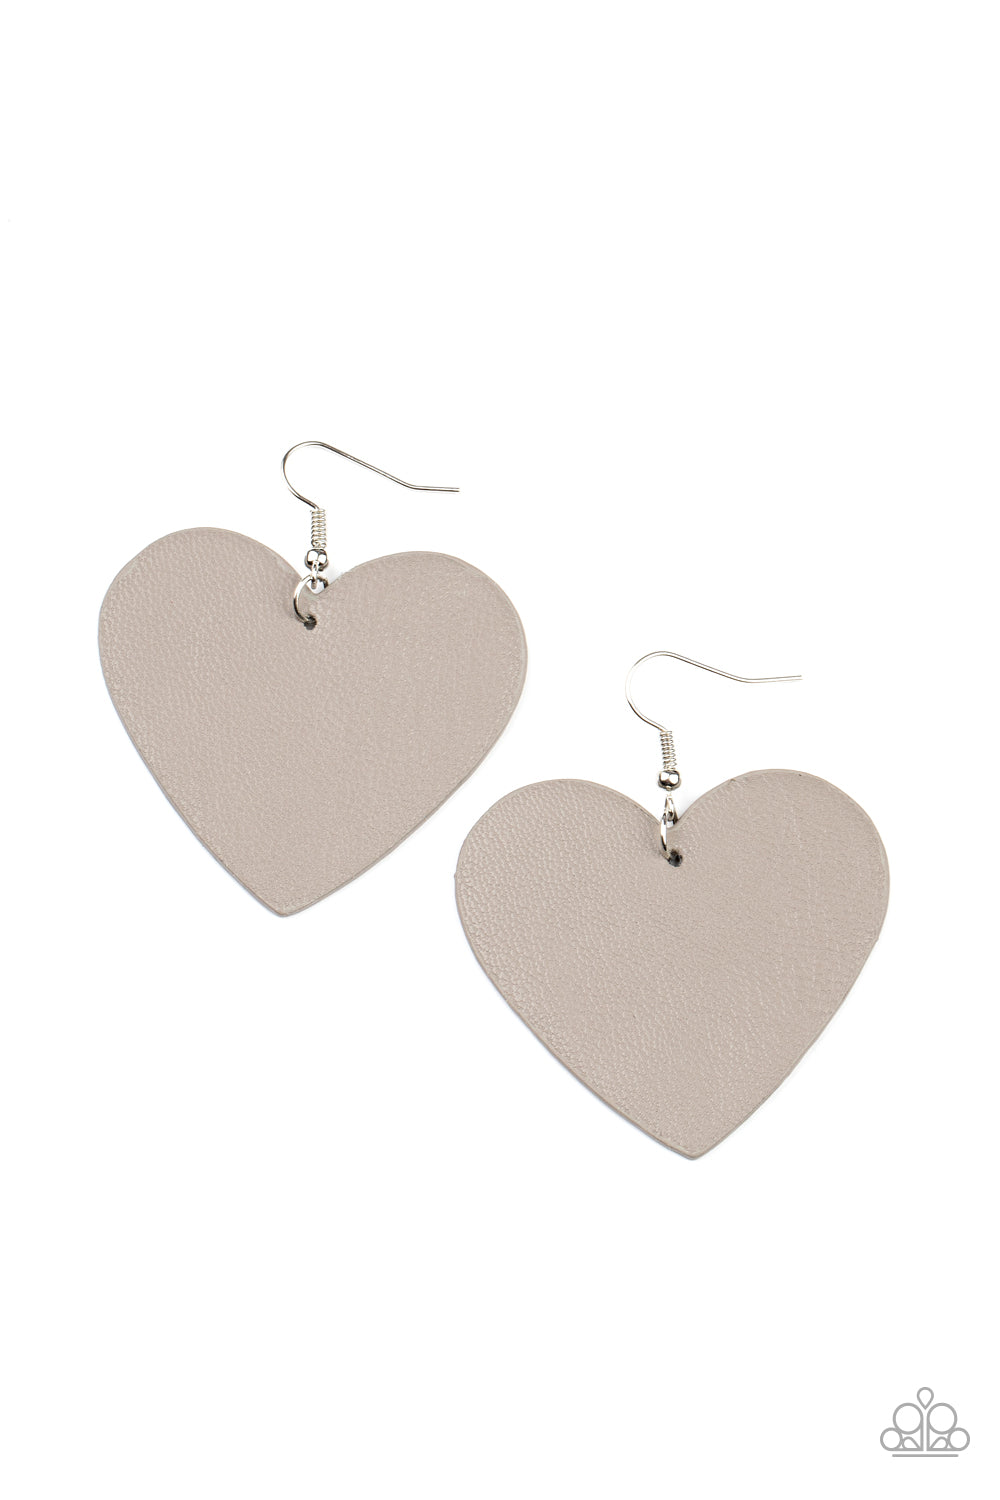 Country Crush - Silver Leather Heart Earringsban Ultimate Gray leather heart frame swings from the ear for a flirtatiously neutral pop of color. Earring attaches to a standard fishhook fitting.  Sold as one pair of earrings.  Paparazzi Jewelry is lead and nickel free so it's perfect for sensitive skin too!